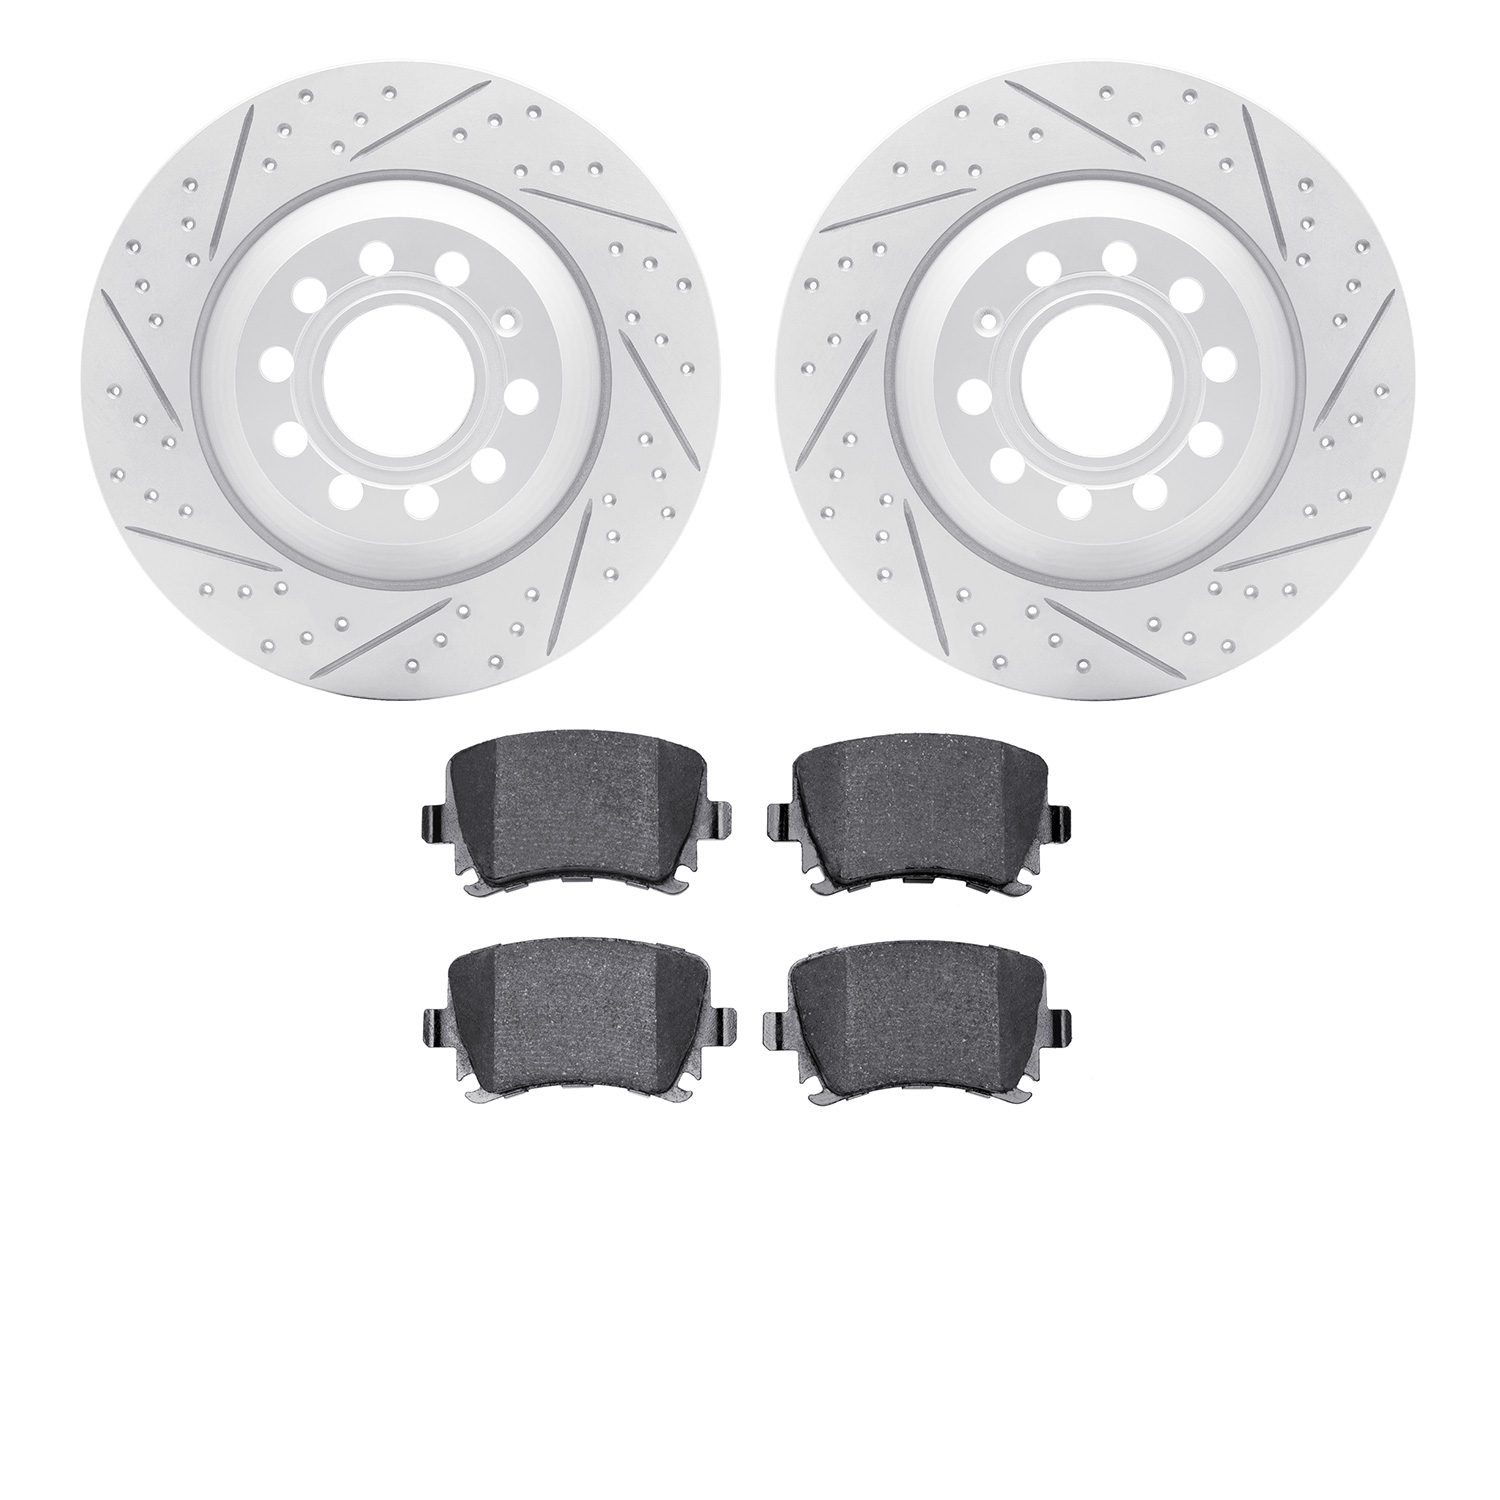 2502-73036 Geoperformance Drilled/Slotted Rotors w/5000 Advanced Brake Pads Kit, 2005-2011 Audi/Volkswagen, Position: Rear